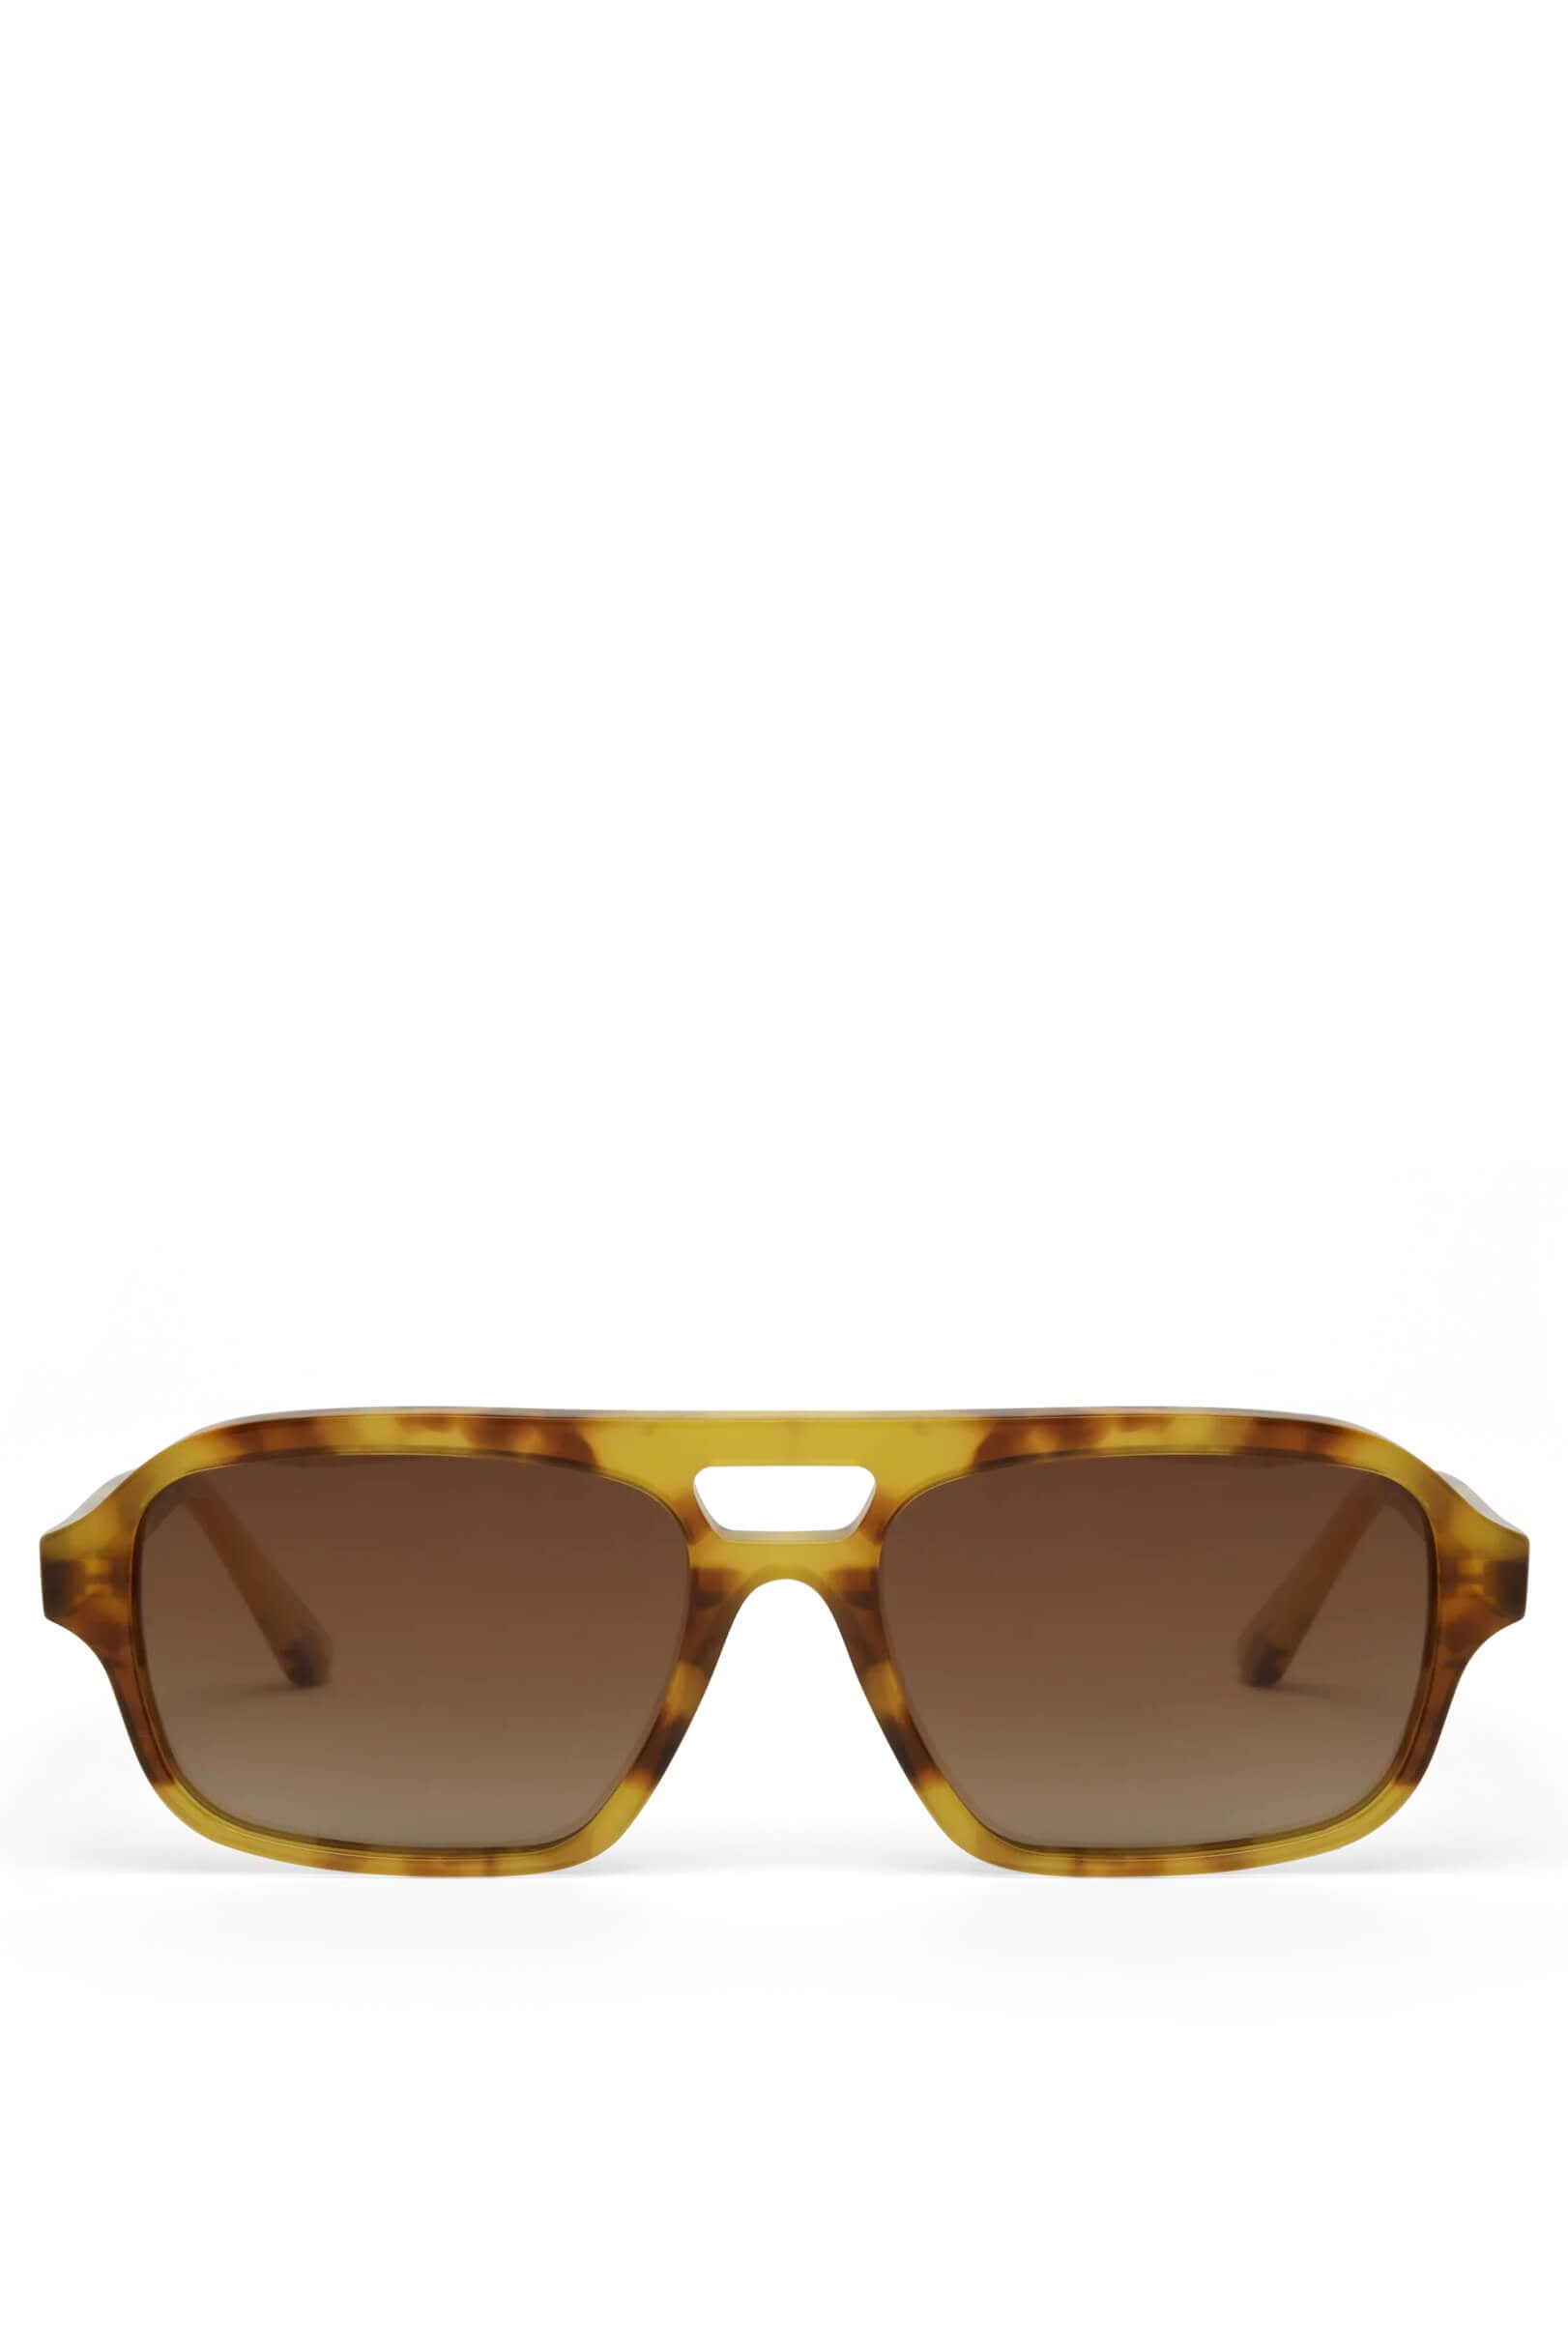 Banbe The Delevigne | Banoffee Tort Yellow